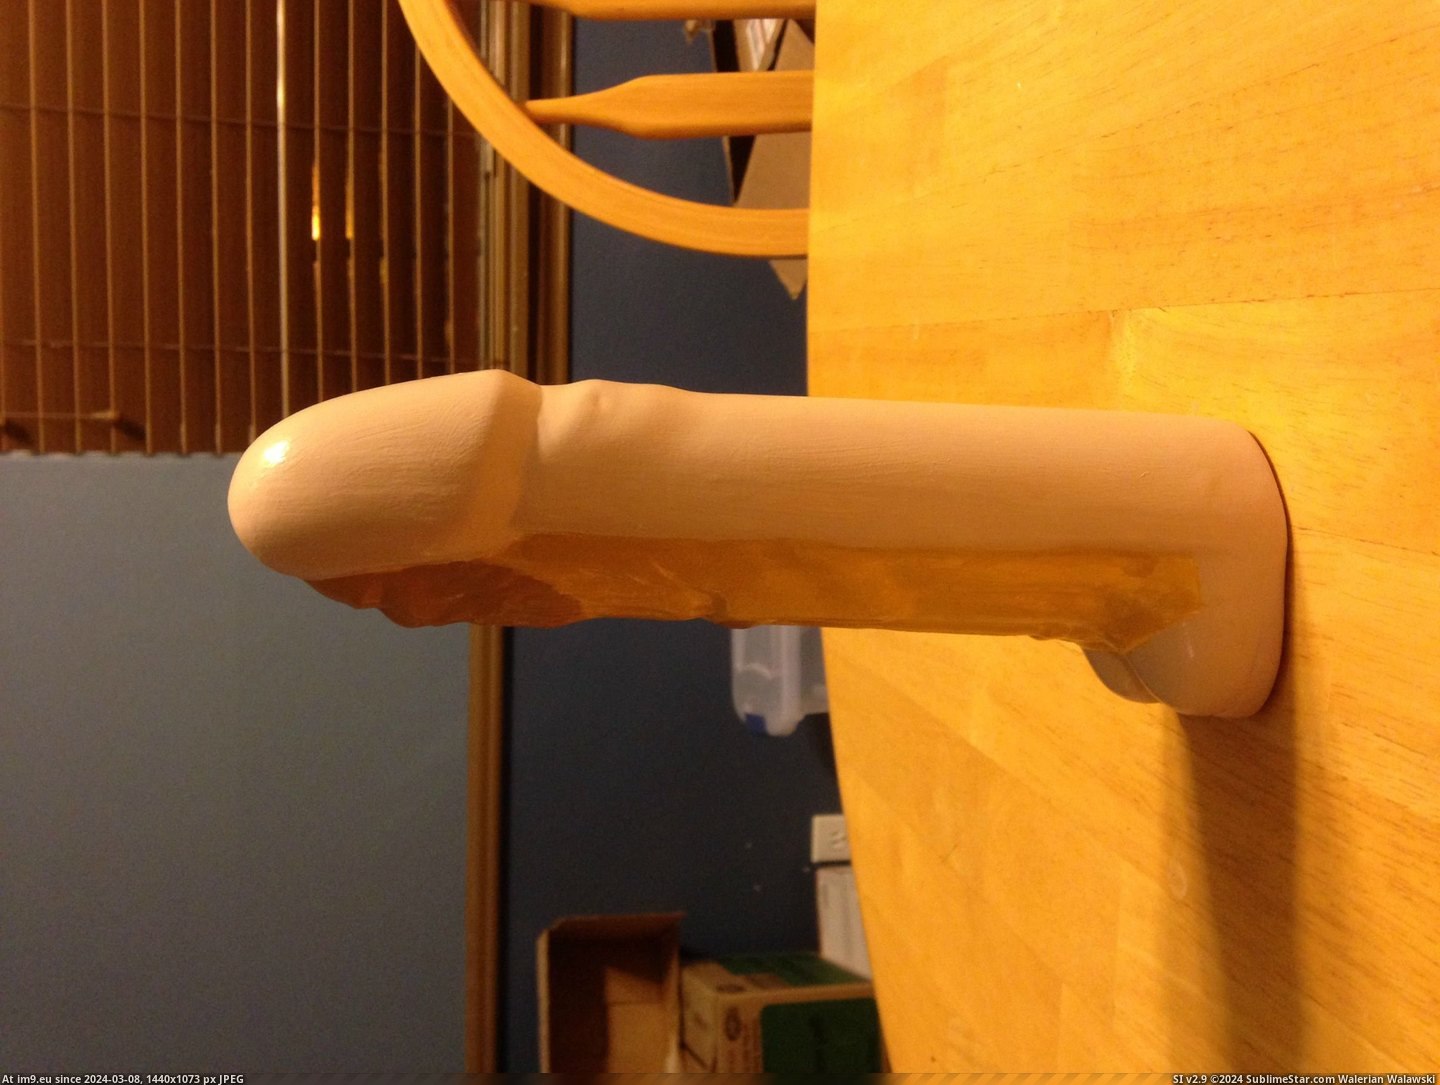 #Wtf #Art #Great #Out #Penis #Gave #Grandmother #Gifts #Got #She #Family #Boyfriend [Wtf] My Great-Grandmother got a boyfriend...so she made this penis art and gave it out as gifts to the family. [NSFW] 5 Pic. (Bild von album My r/WTF favs))